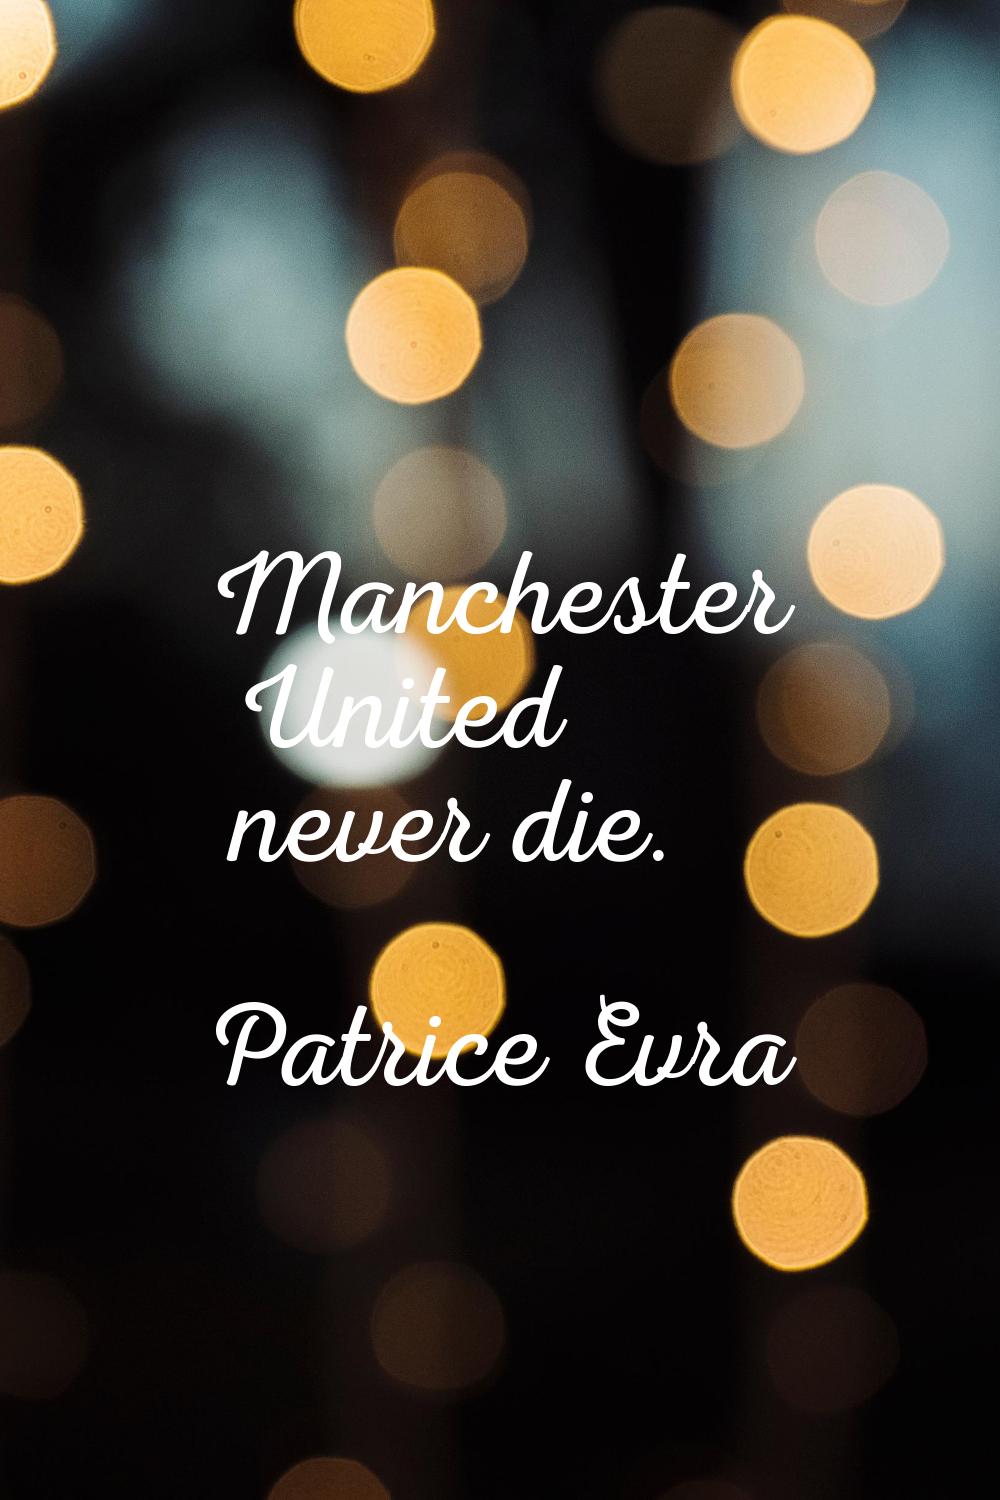 Manchester United never die.